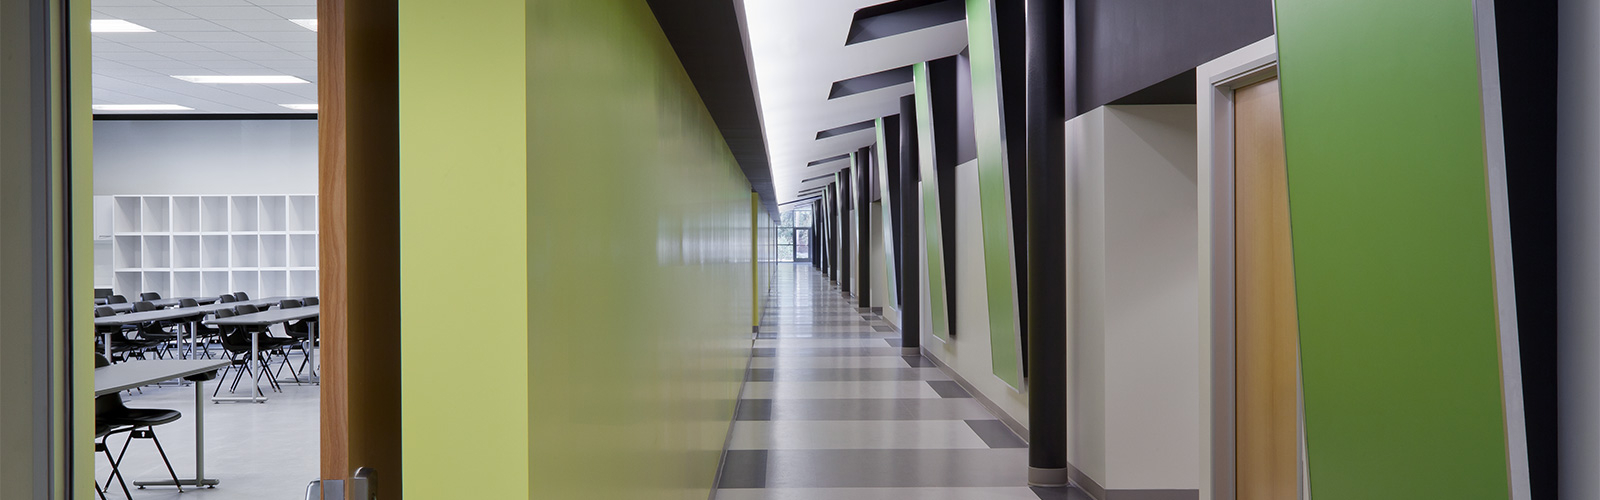 An image of a large empty classroom hallway with a green, grey and white colour combination.